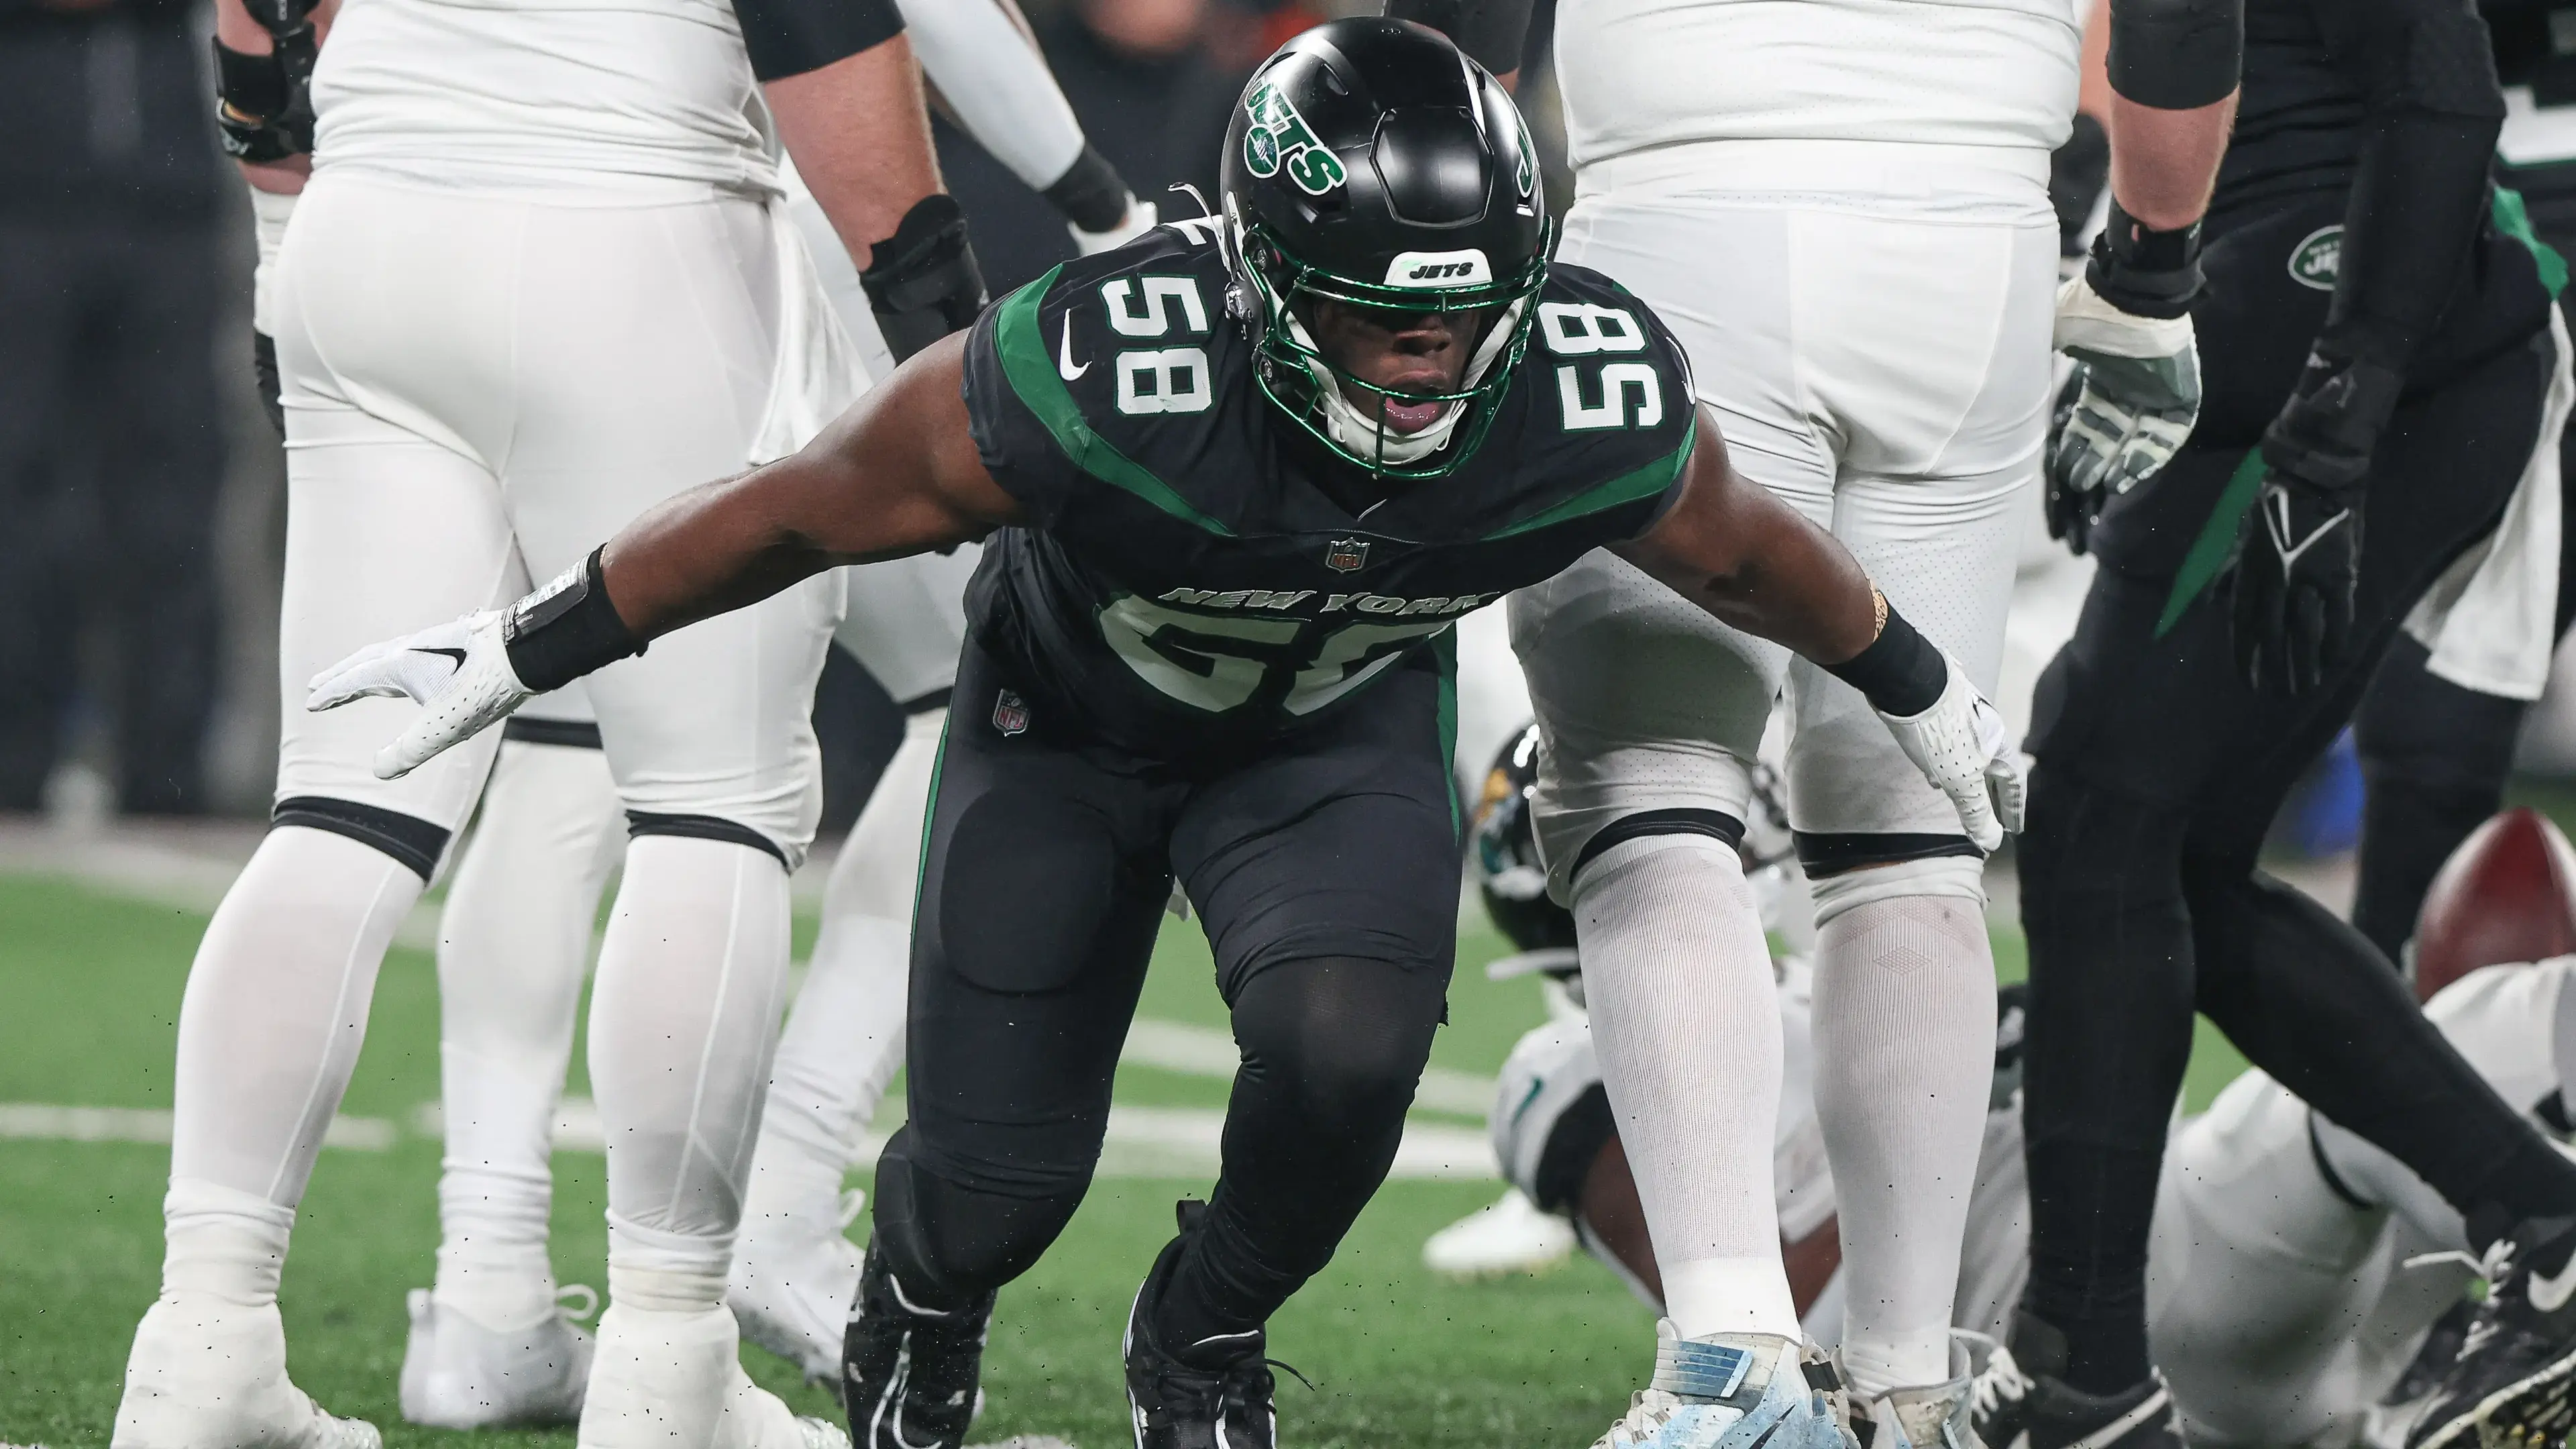 New York Jets defensive end Carl Lawson (58) celebrates a defensive stop during the first half against the Jacksonville Jaguars at MetLife Stadium / Vincent Carchietta - USA TODAY Sports